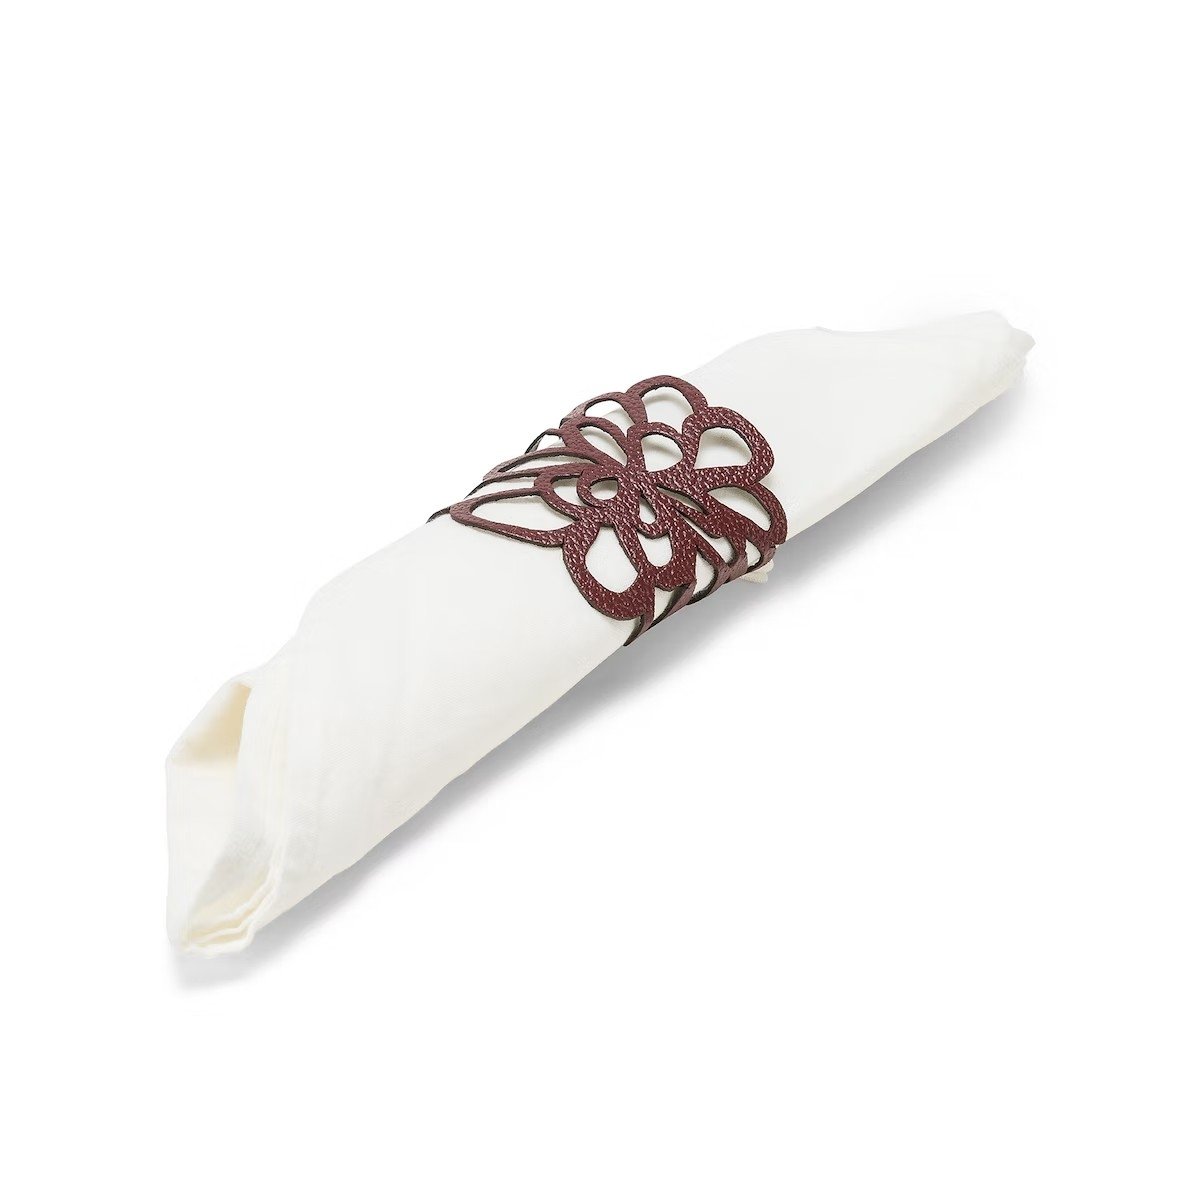 A lace effect washable paper napkin holder is shown in brown, around a white napkin.